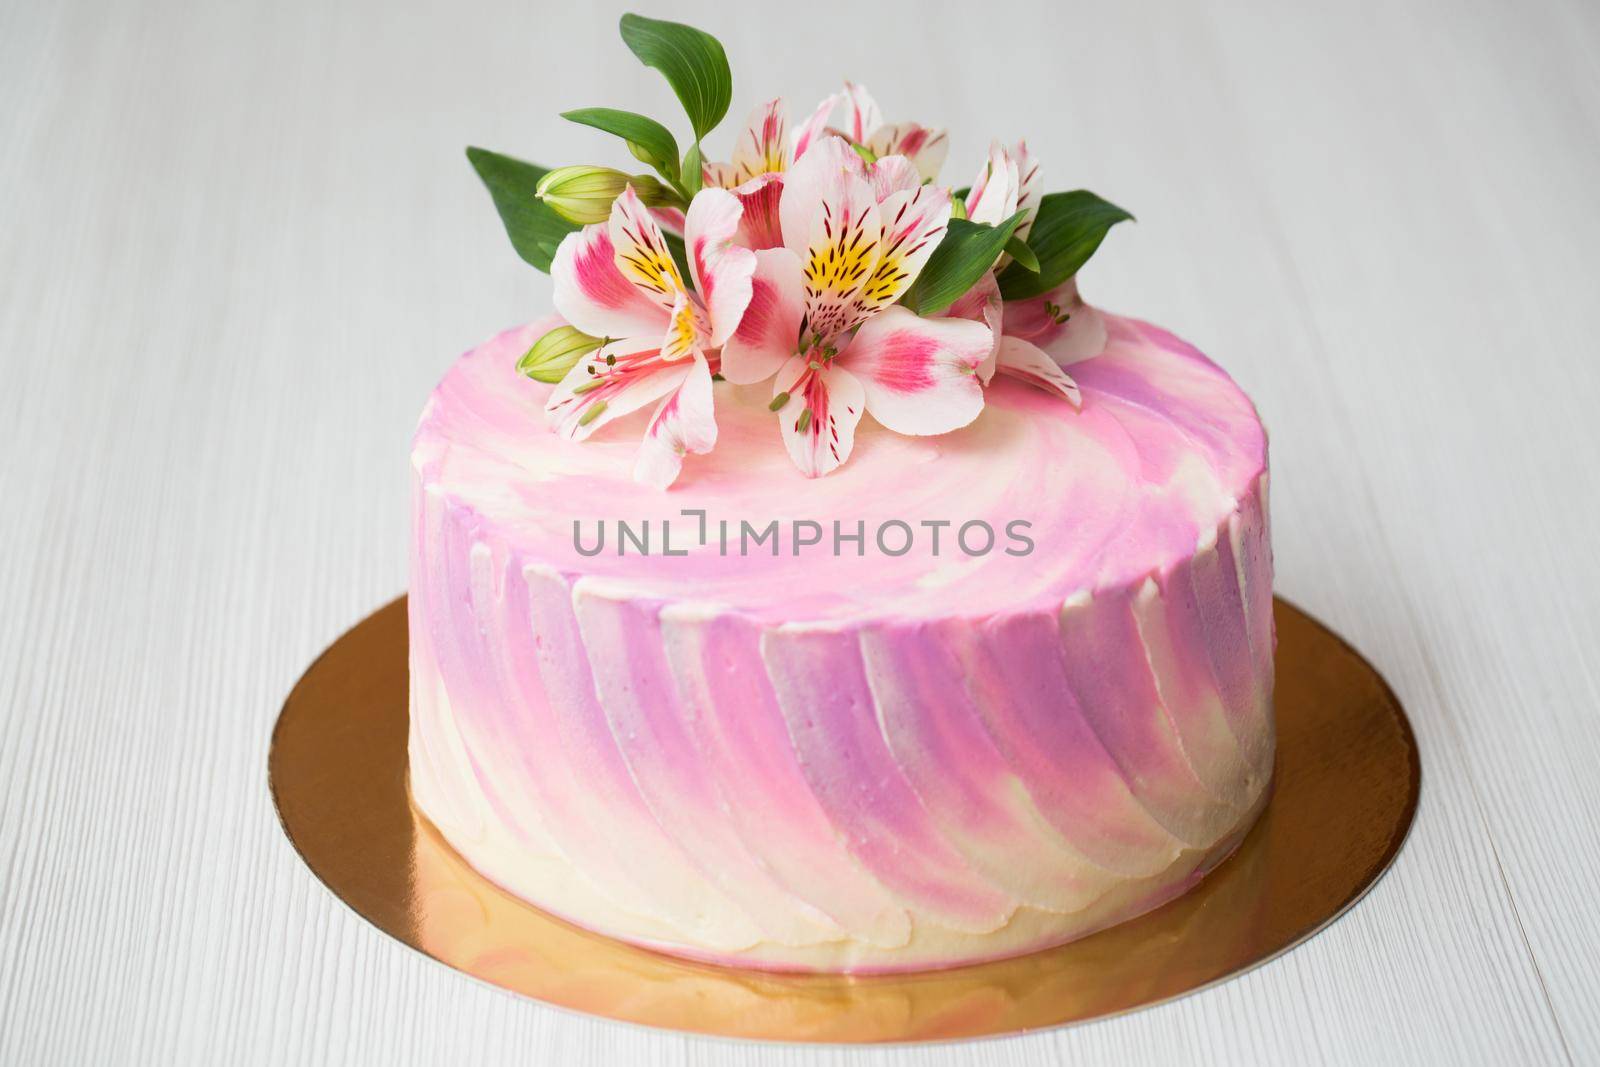 A cake with pink chocolate decor and flowers.